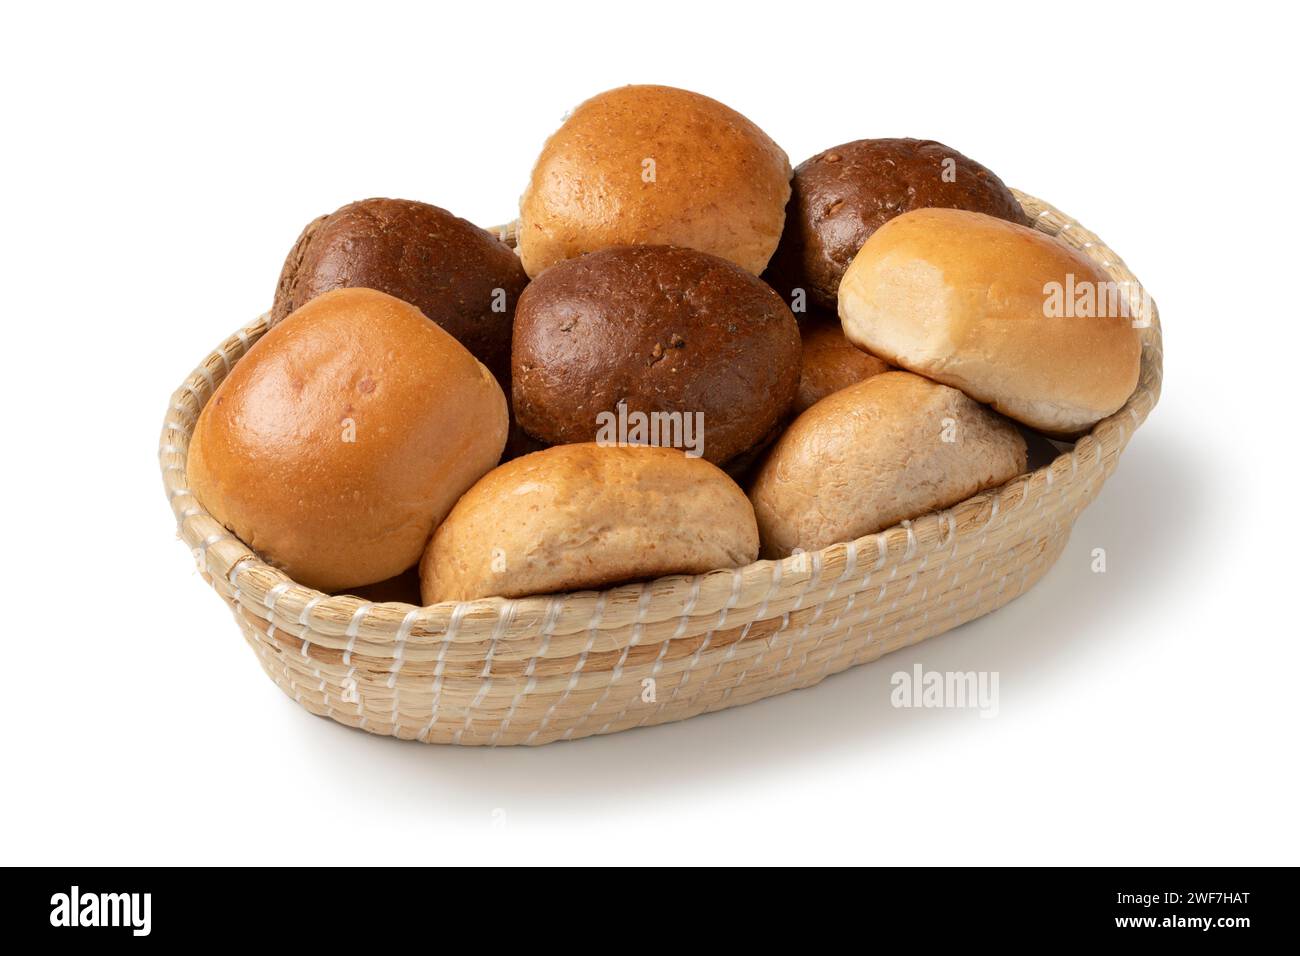 Basket with a variation of fresh baked white and brown buns of bread close up isolated on white background Stock Photo